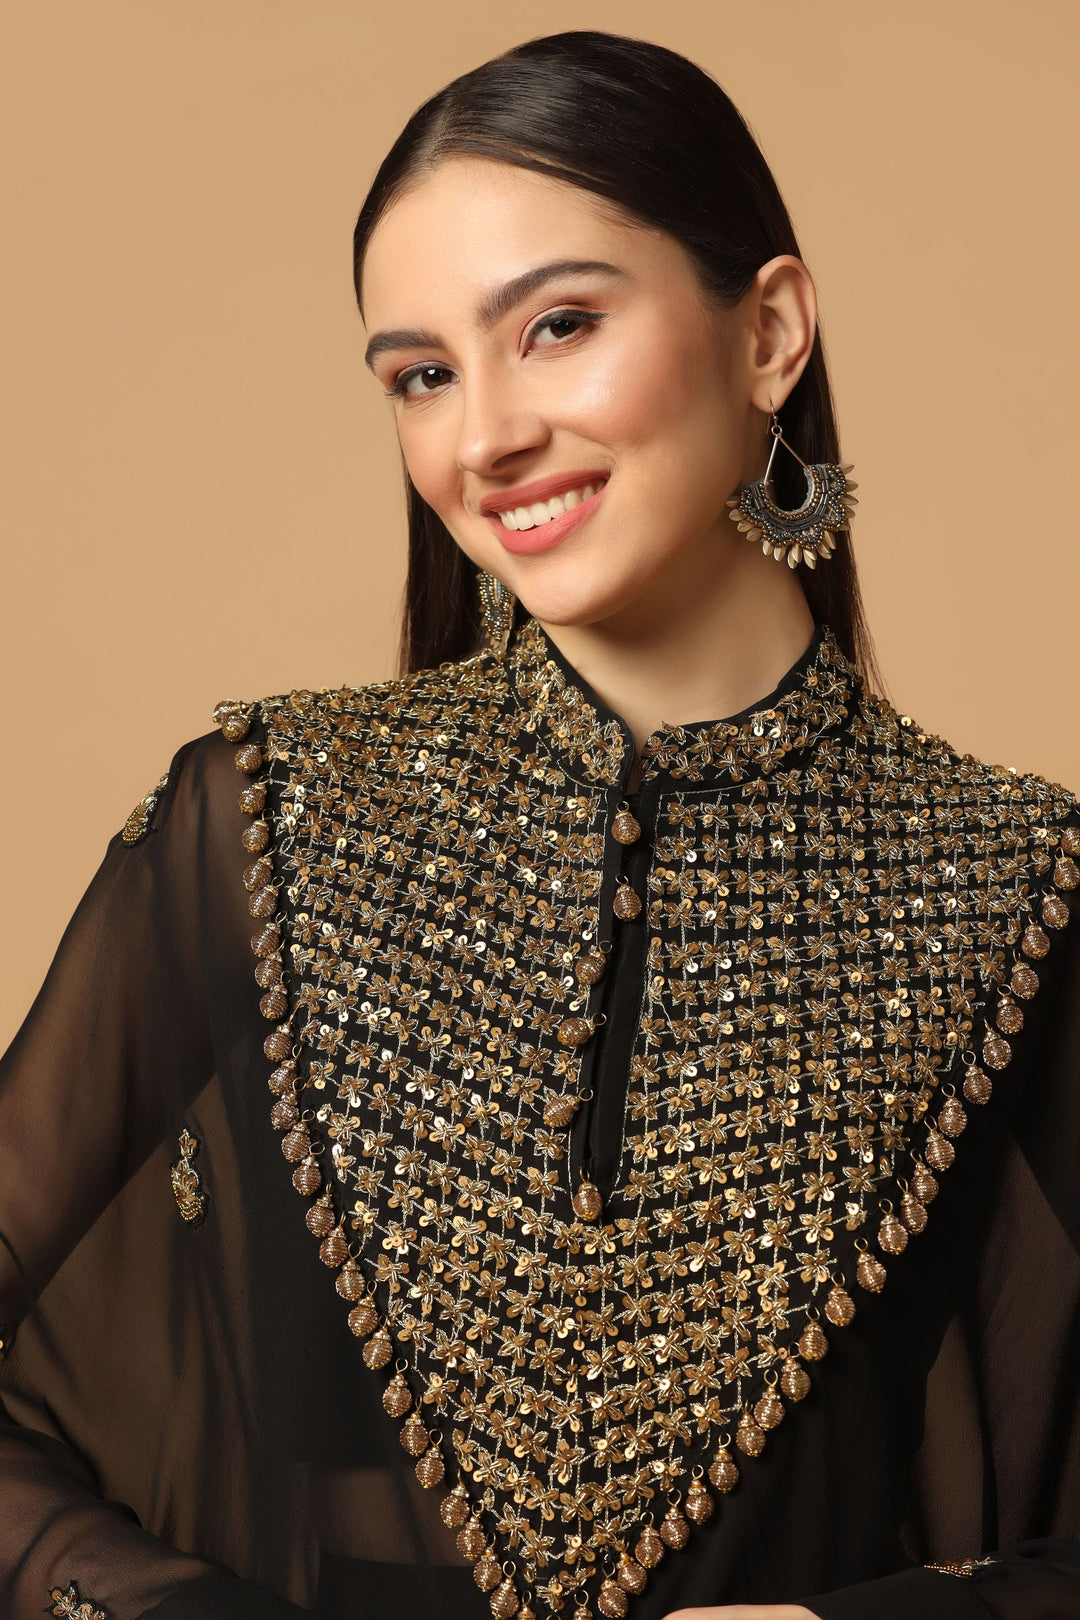 Black Skirt Set with Hand Embroidered Kaftan Cape and bustier